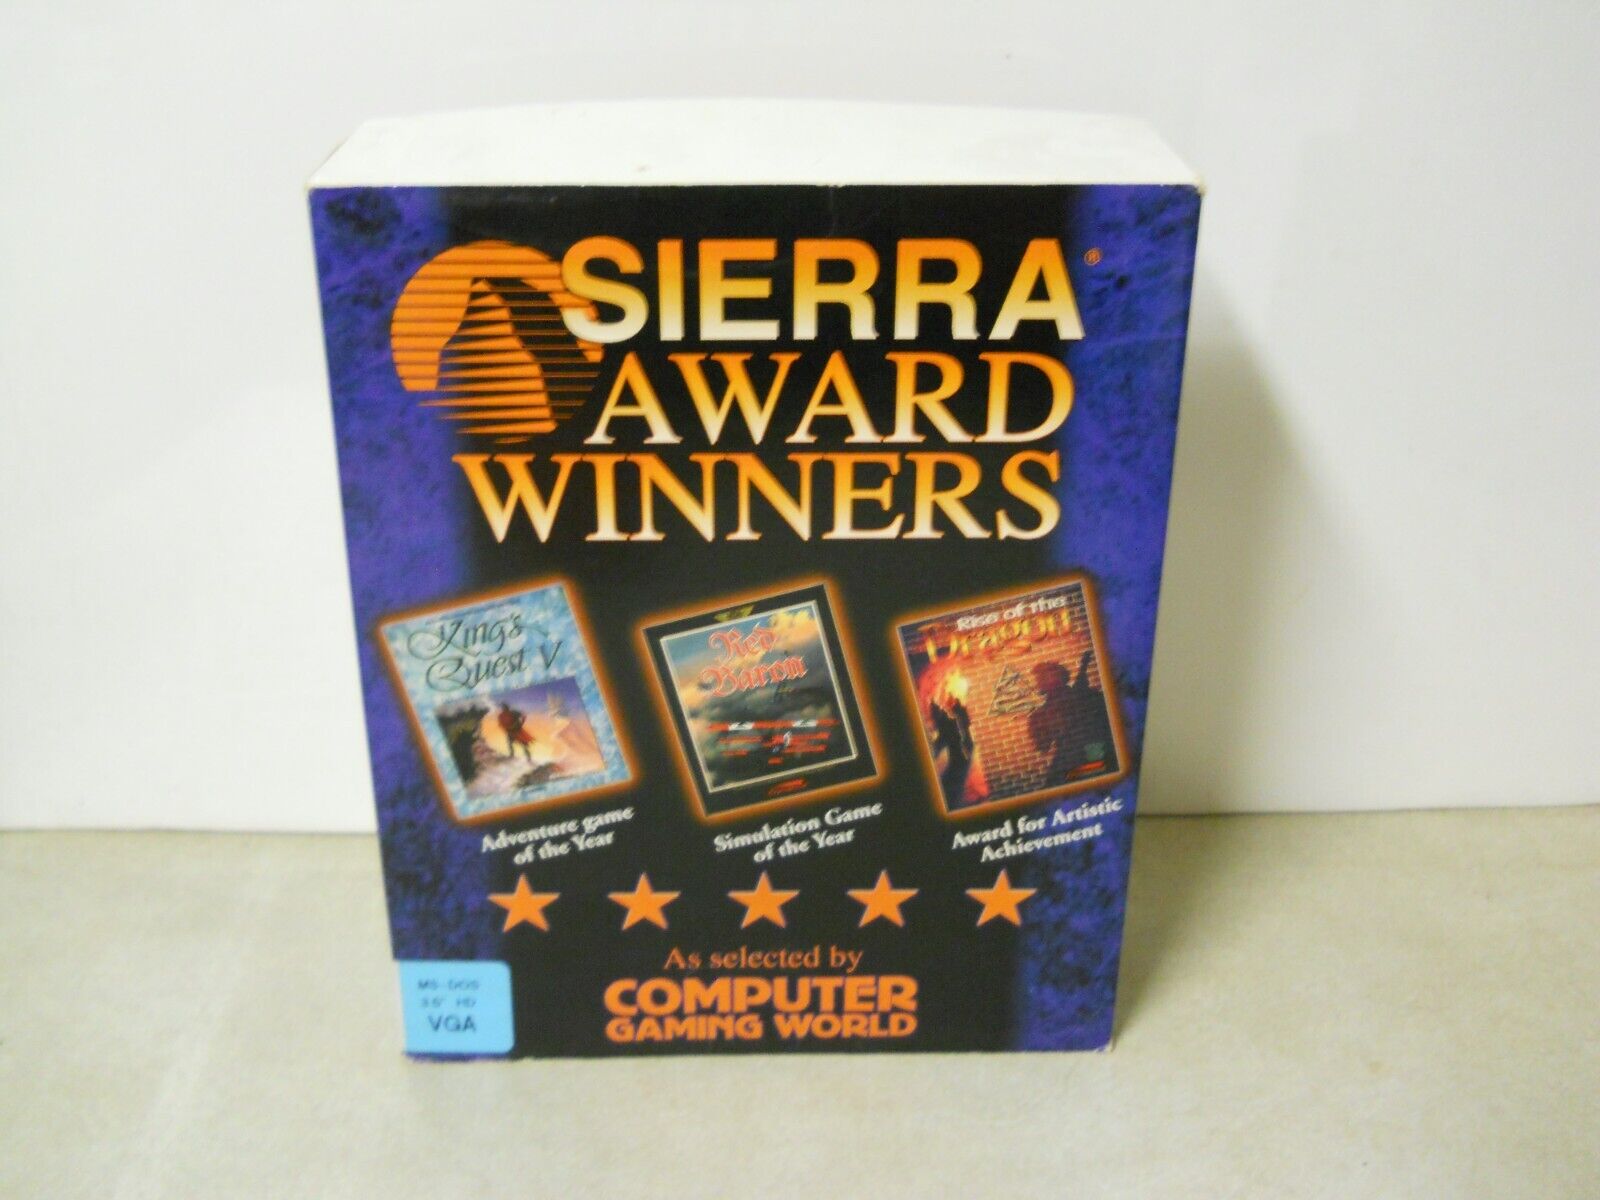 Sierra Award Winners Rise of the Dragon & Kings Quest V PC MS-DOS Video Game